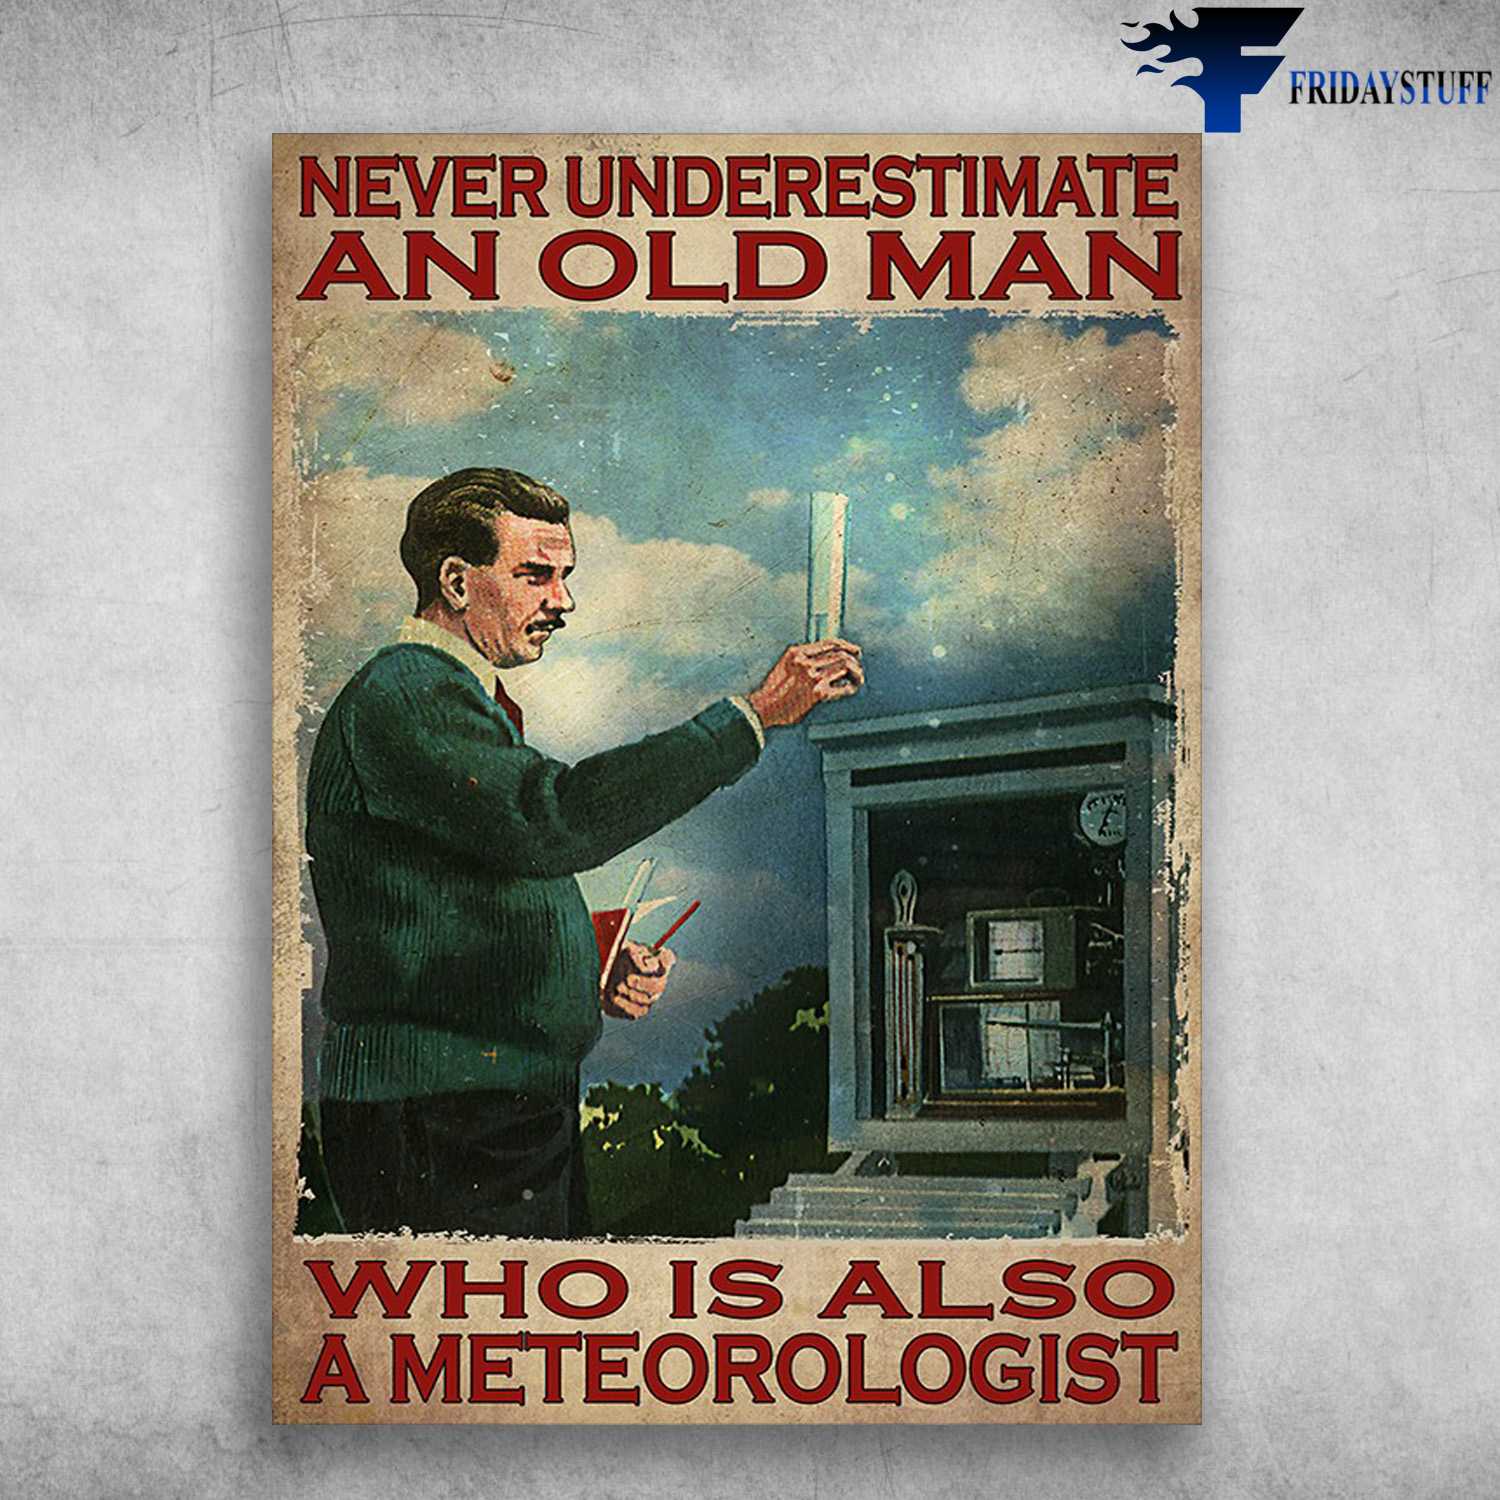 Old Meteorologist - Never Underestimate An Old Man, Who Is Also A Meteorologist